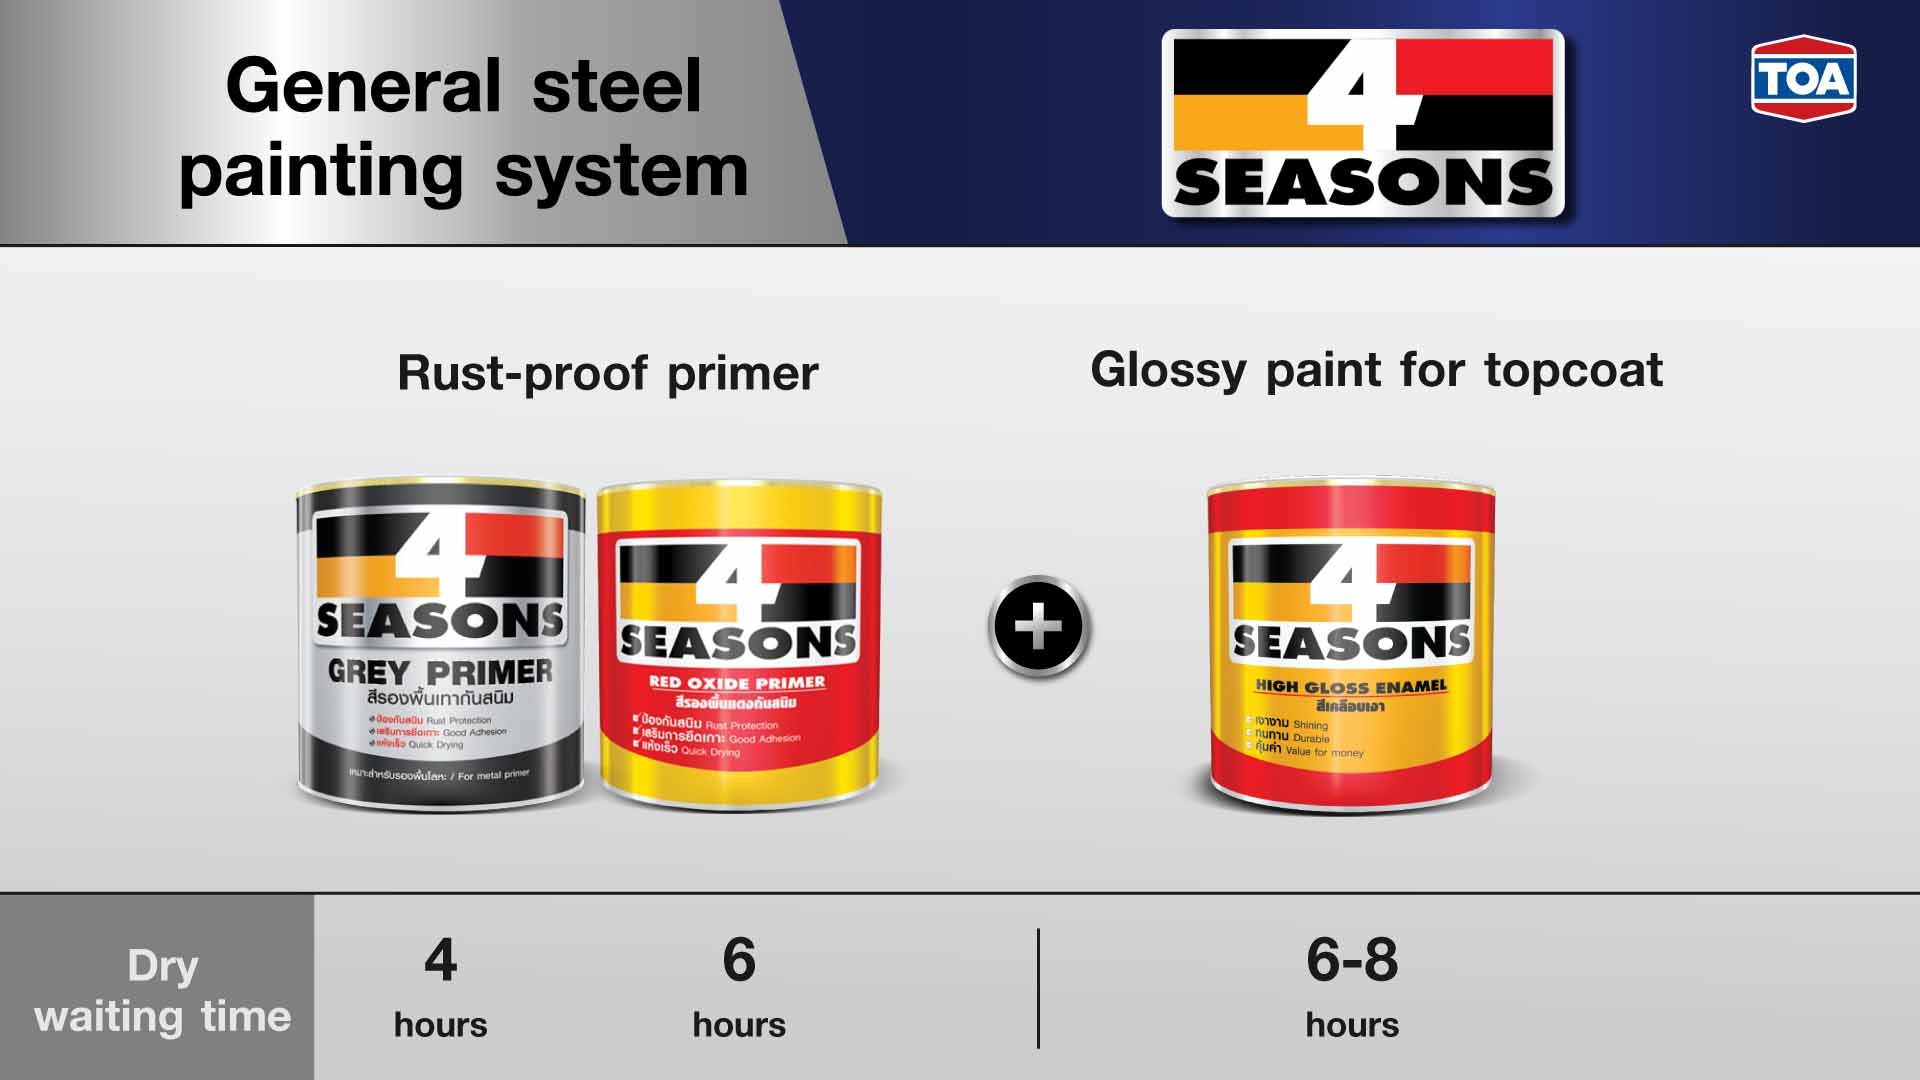 General steel painting system of TOA 4SEASONS Products